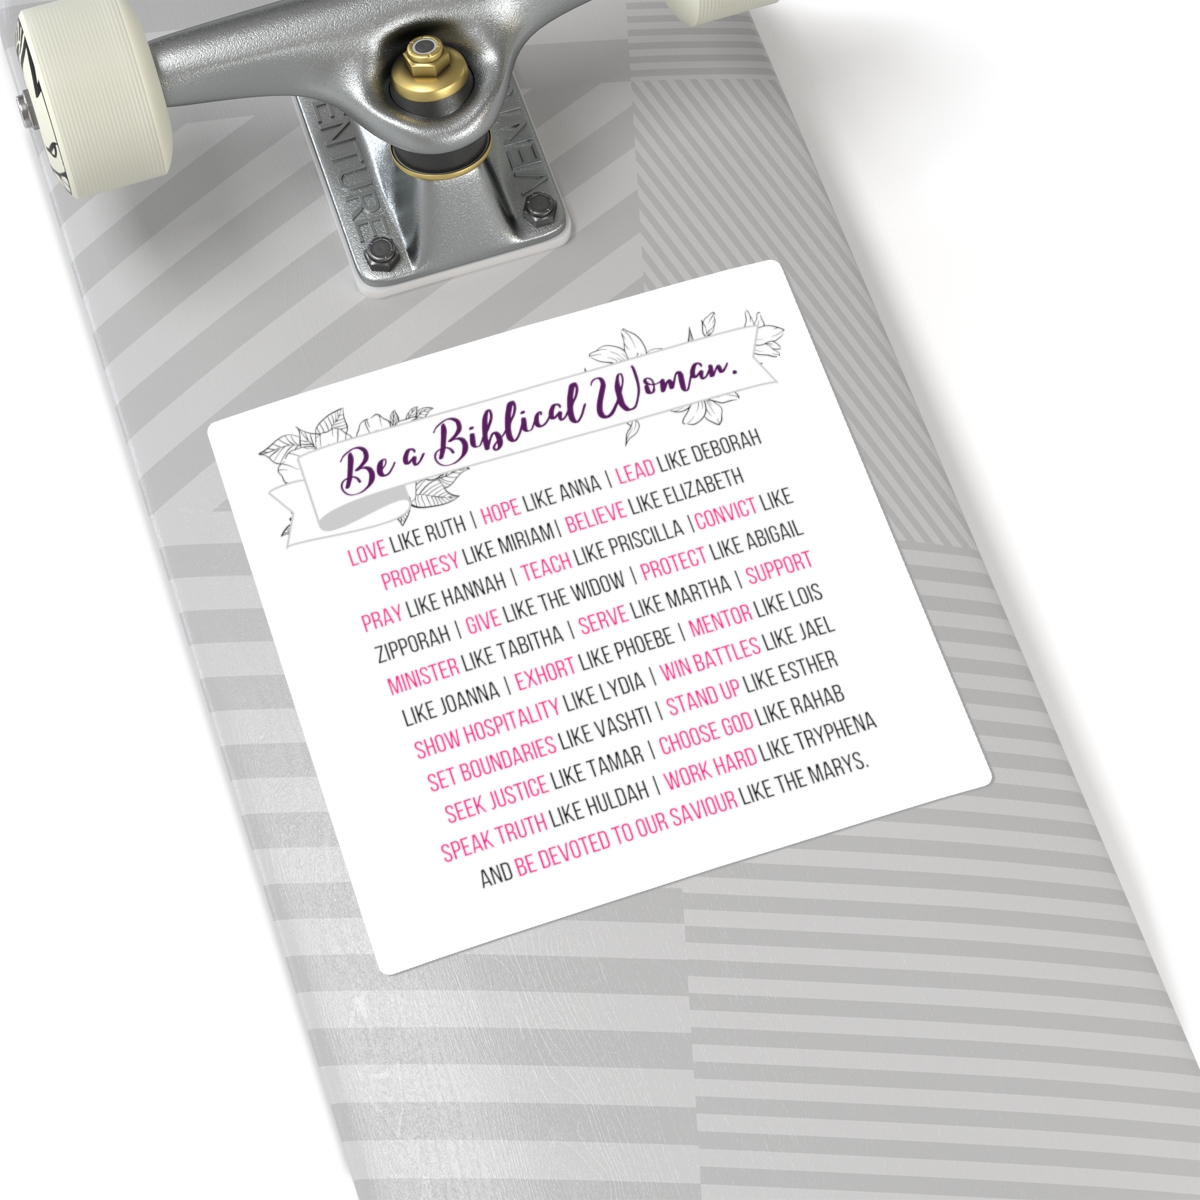 Women of the Bible Stickers - Woman 2 – Create in me designs